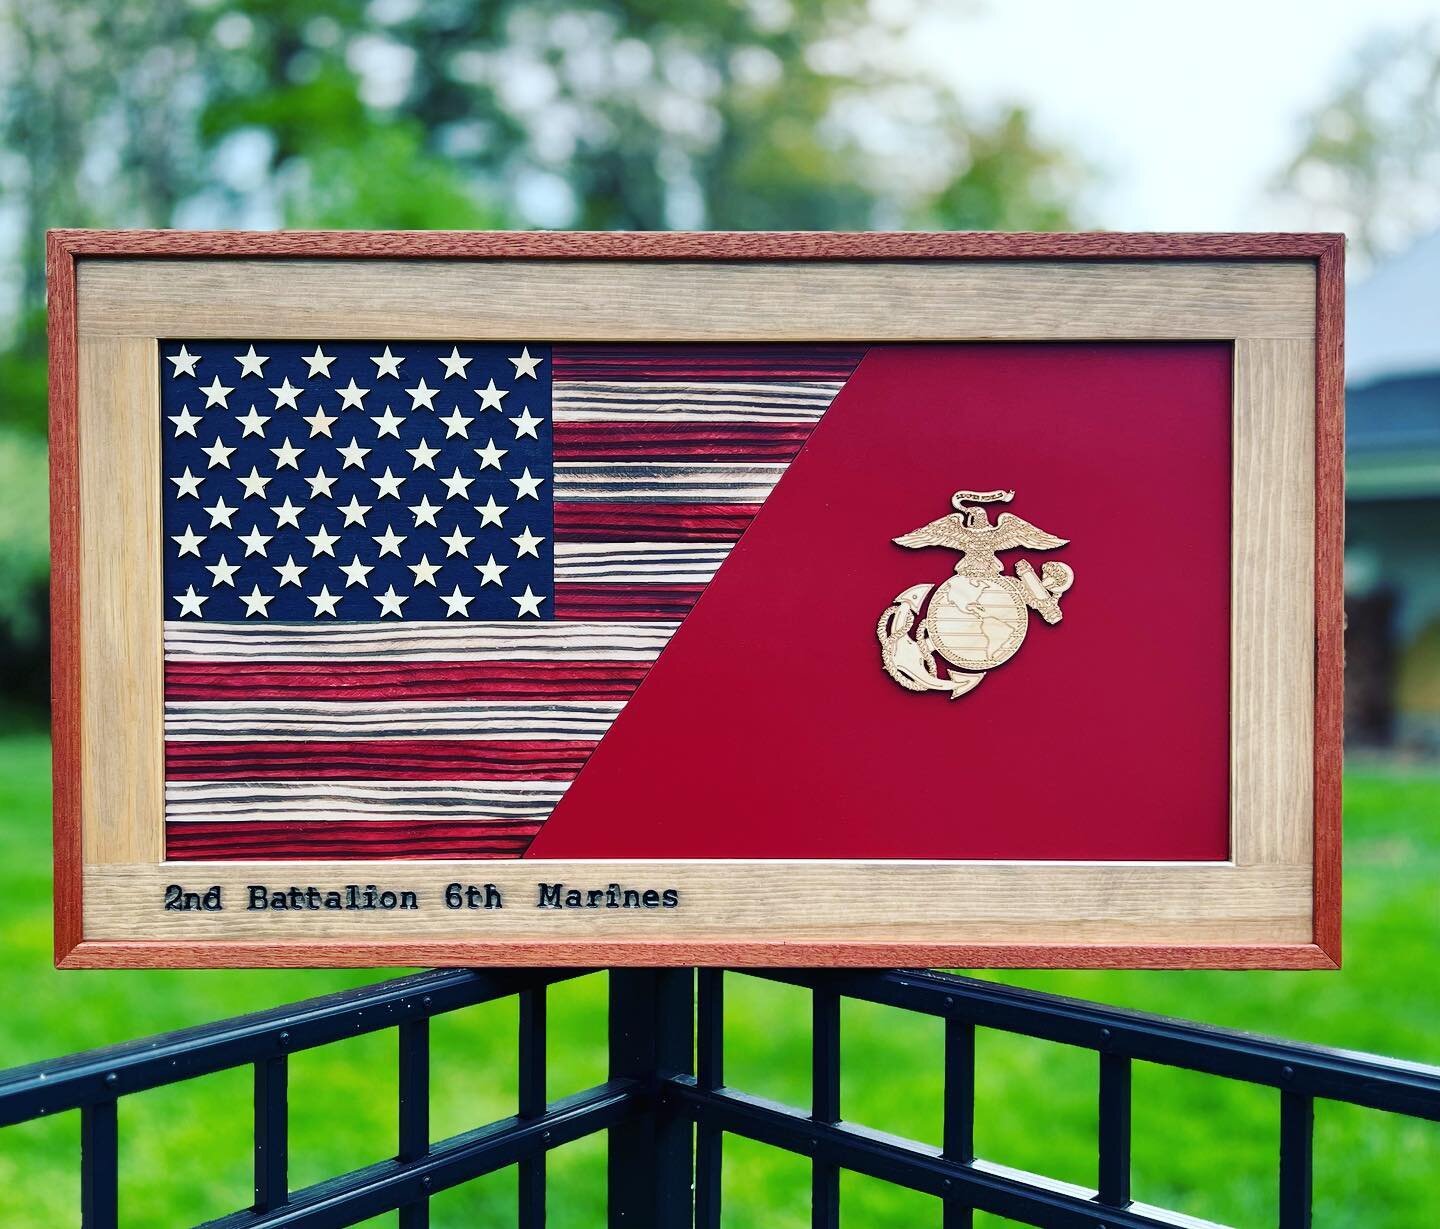 Another one for the Marine Corps. Semper Fi! www.shoveltownflag.com